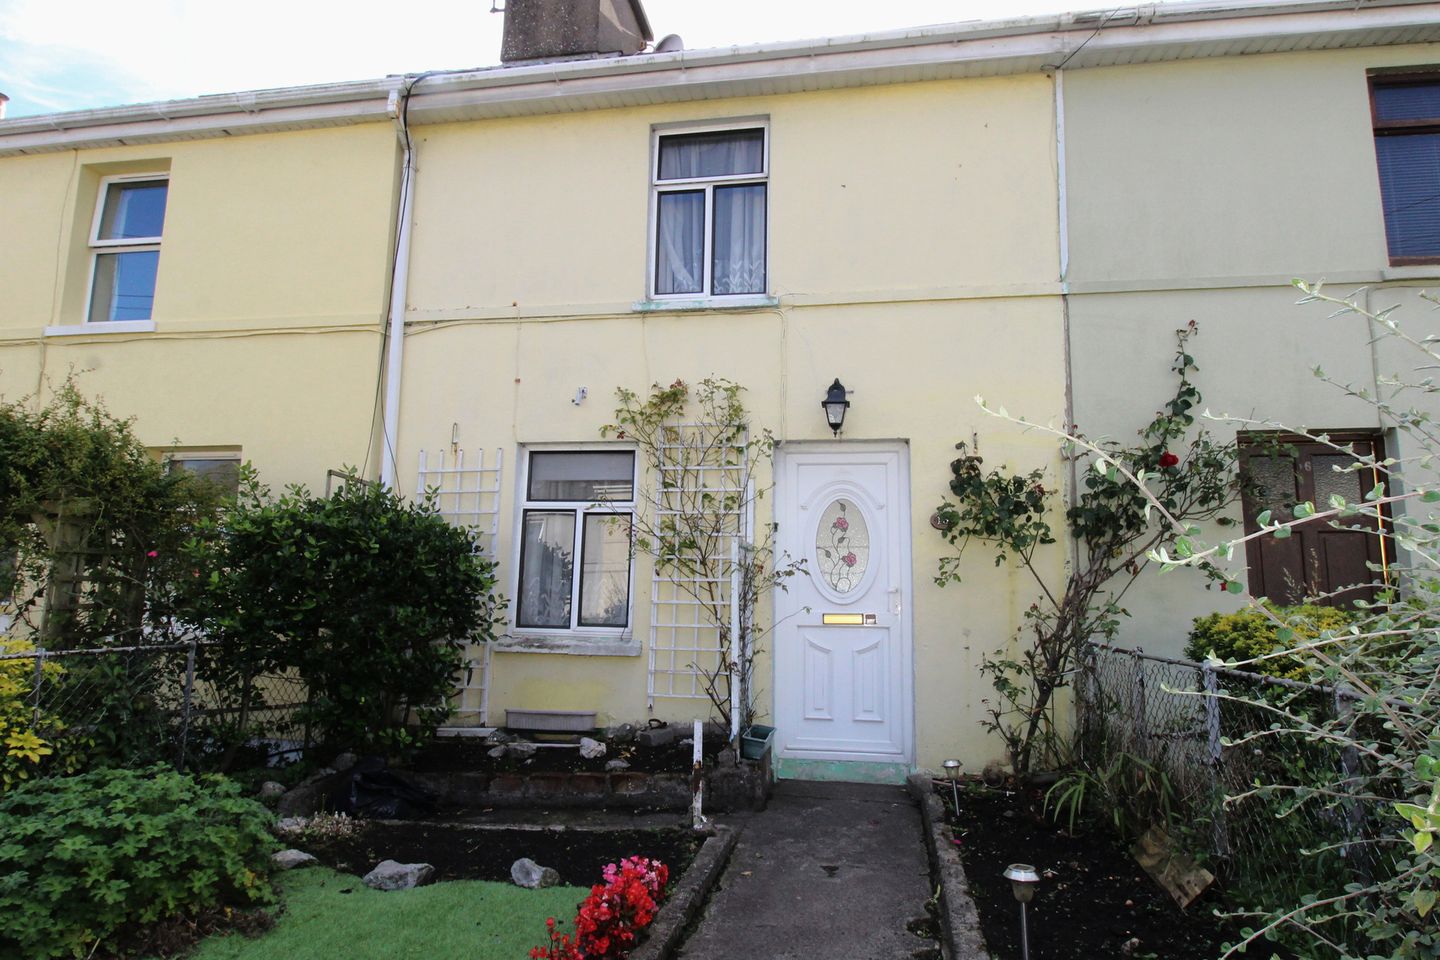 15 Fitzgerald Terrace, Dungarvan, Co. Waterford, X35XE93